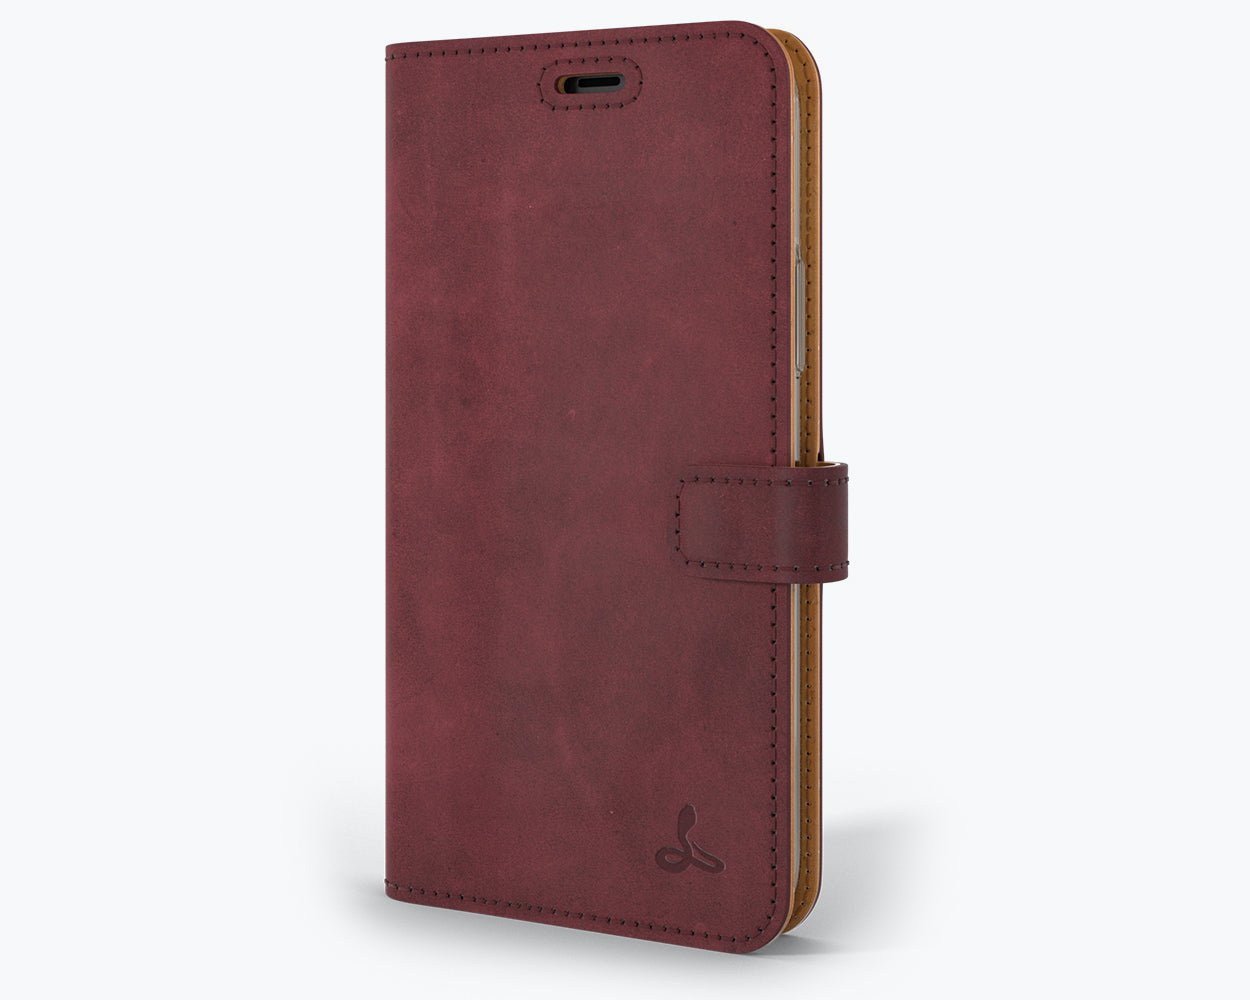 Apple iPhone 11 Pro Max - Vintage Leather Wallet Plum Apple iPhone 11 Pro Max - Snakehive UK